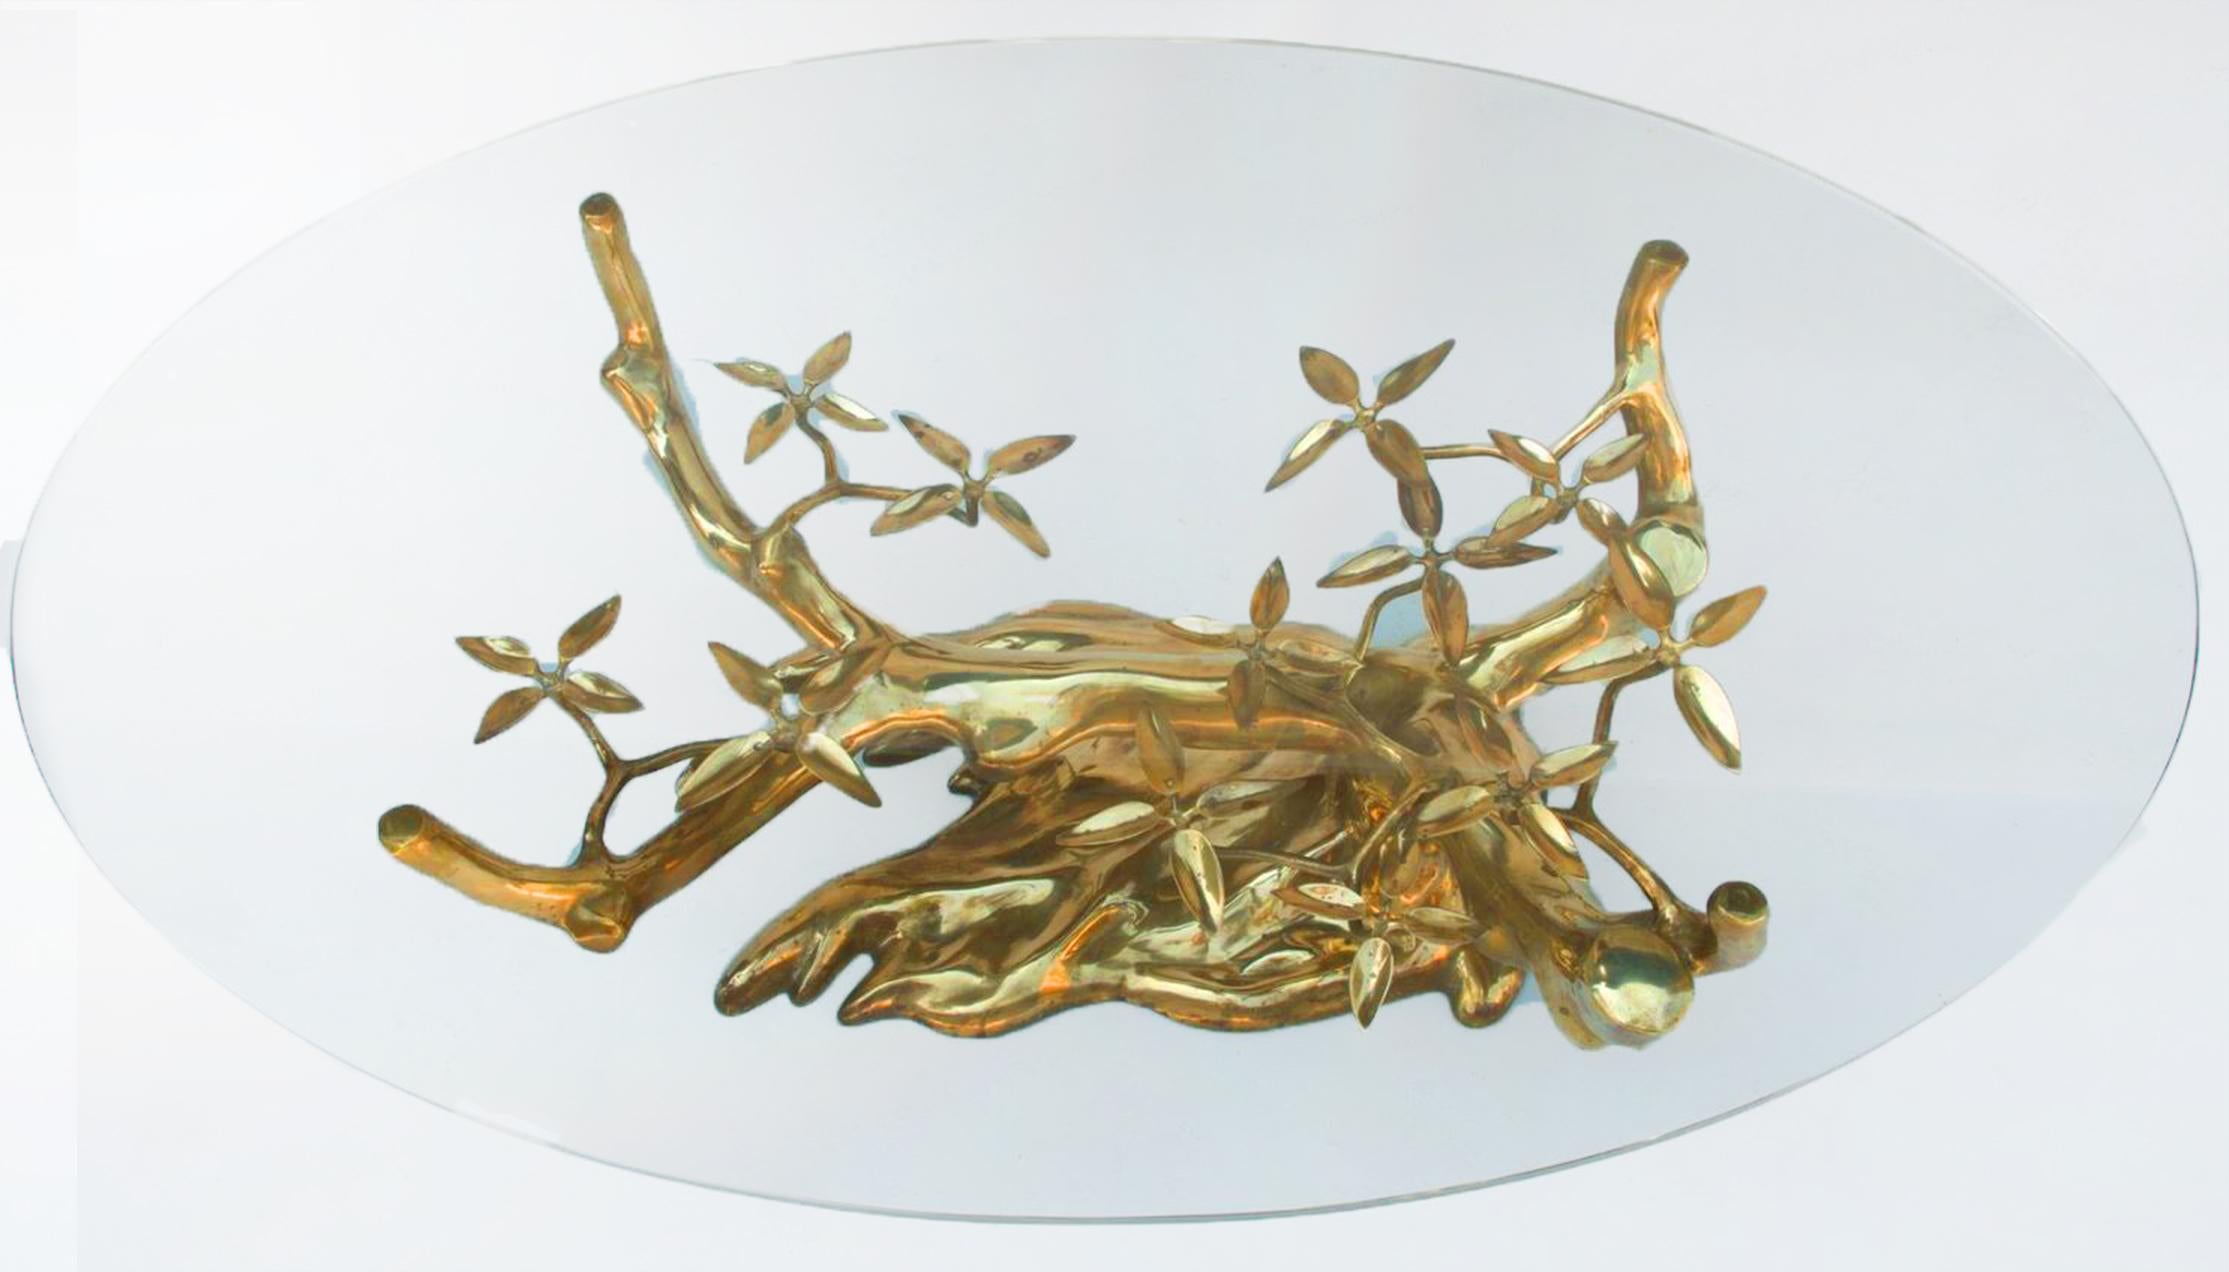 Stunning brass coffee table. Organic shaped. Brass is in very good and clean condition, the glass top is also in very good condition. This is a fantastic work of art. 

This coffee table is positioned as a sculpture in a living room or reading